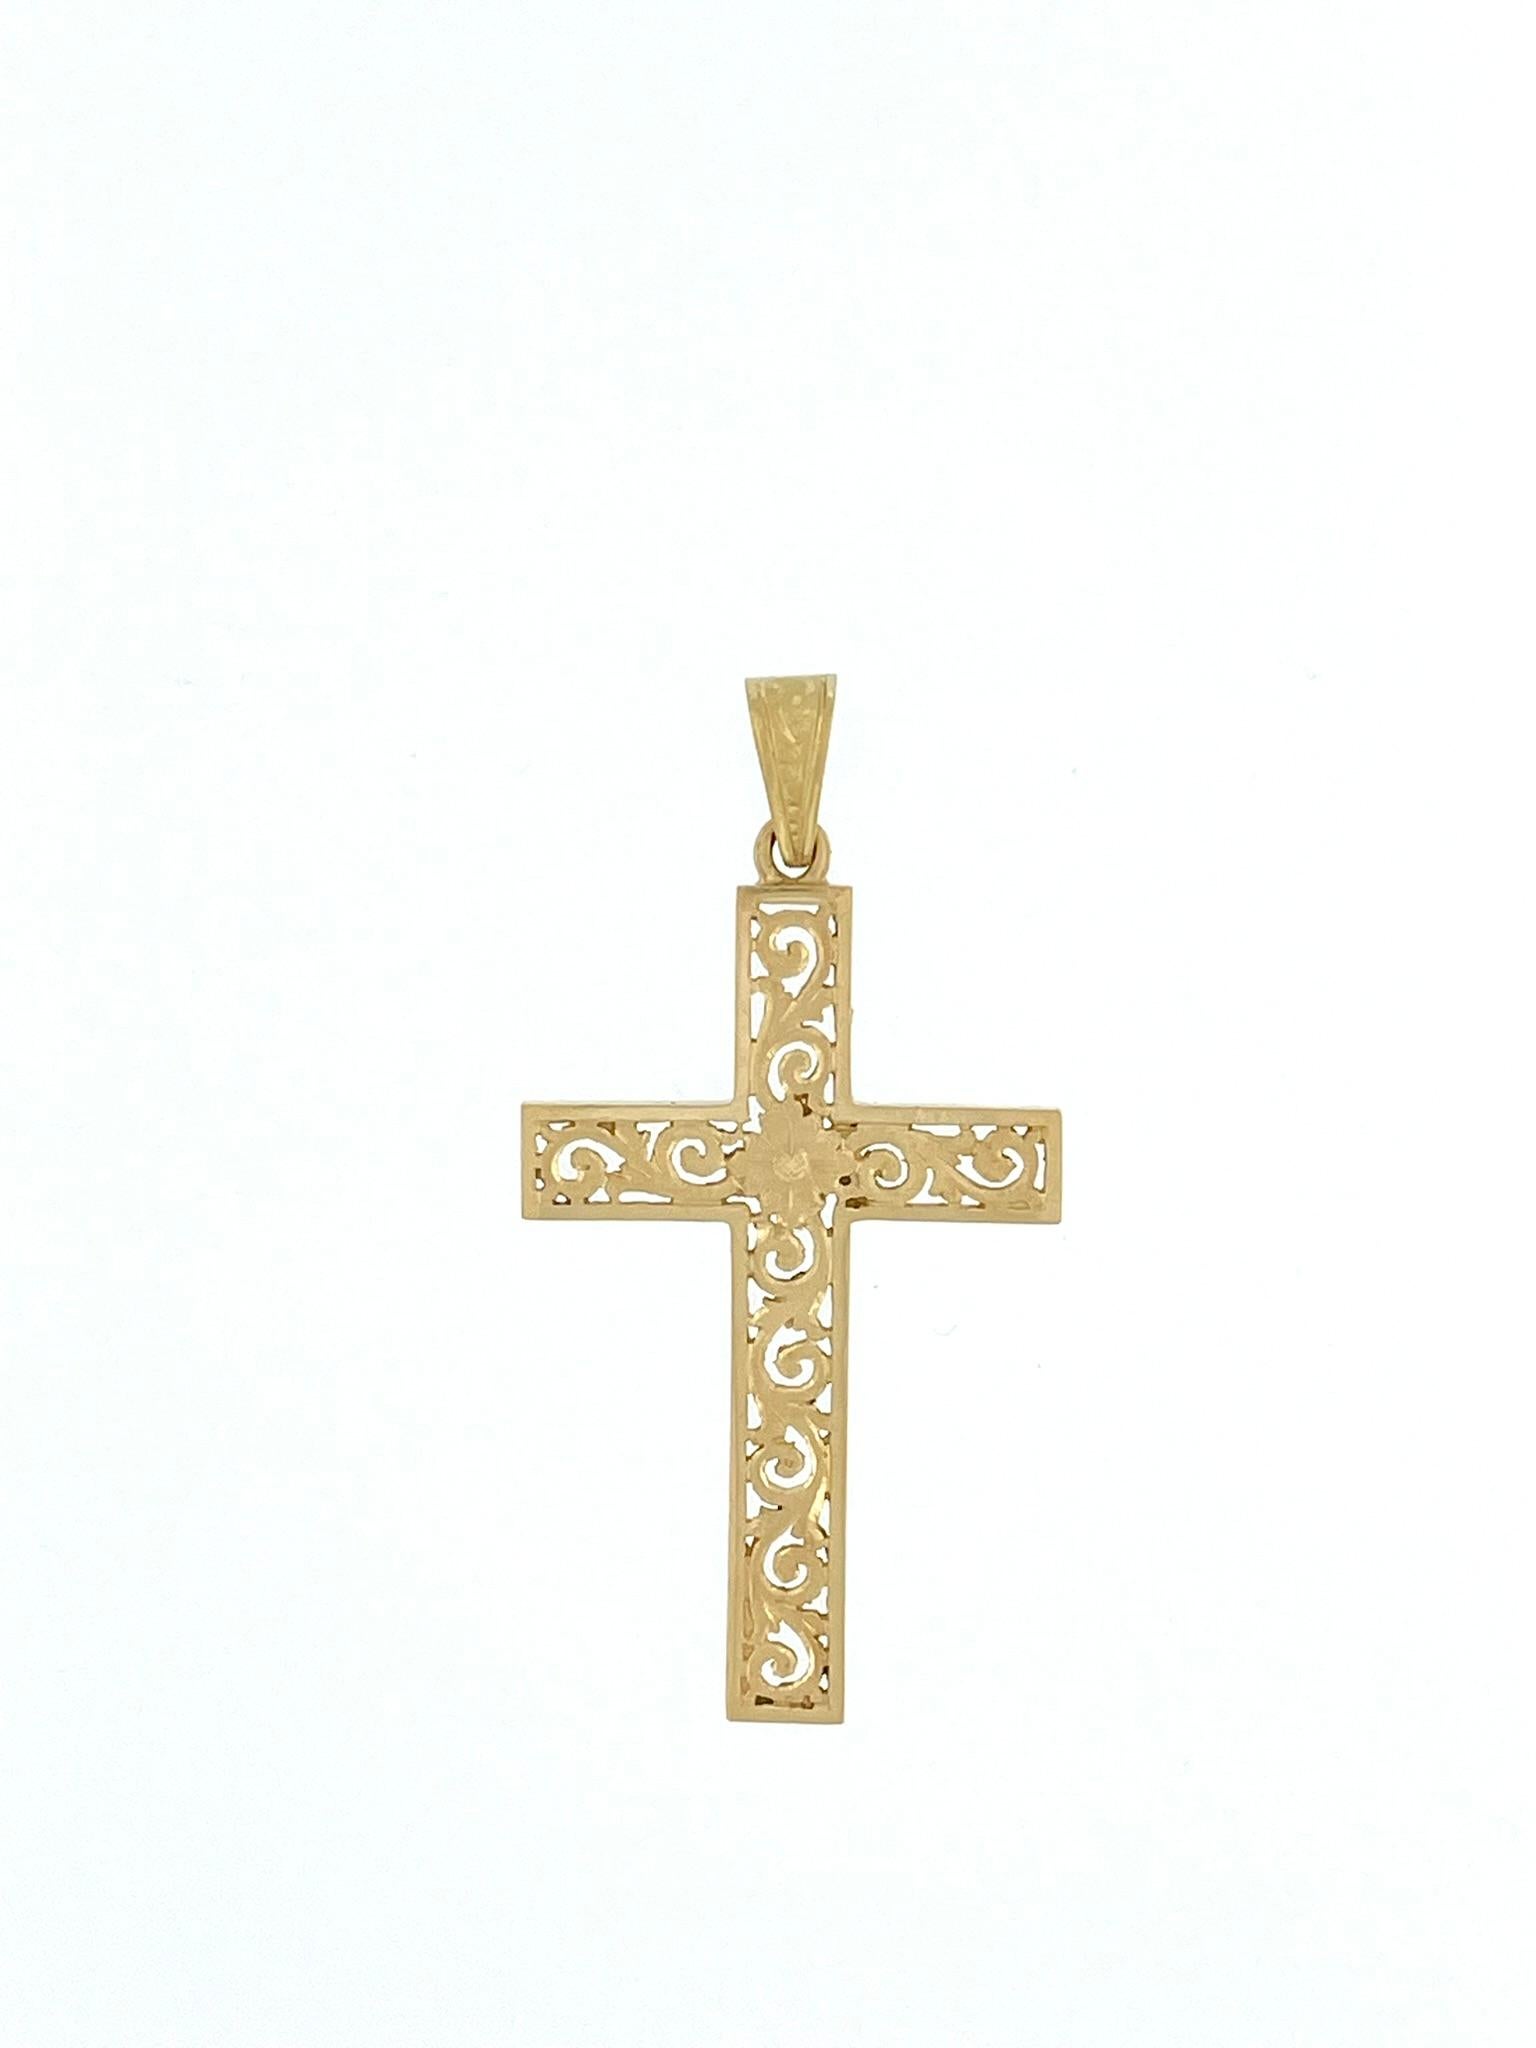 The vintage Italian 18-karat Yellow Gold Cross is a meticulously crafted piece of jewelry characterized by its exquisite hand-carved design. The cross features an open-work design, showcasing a delicate and intricate arrangement of flowers and